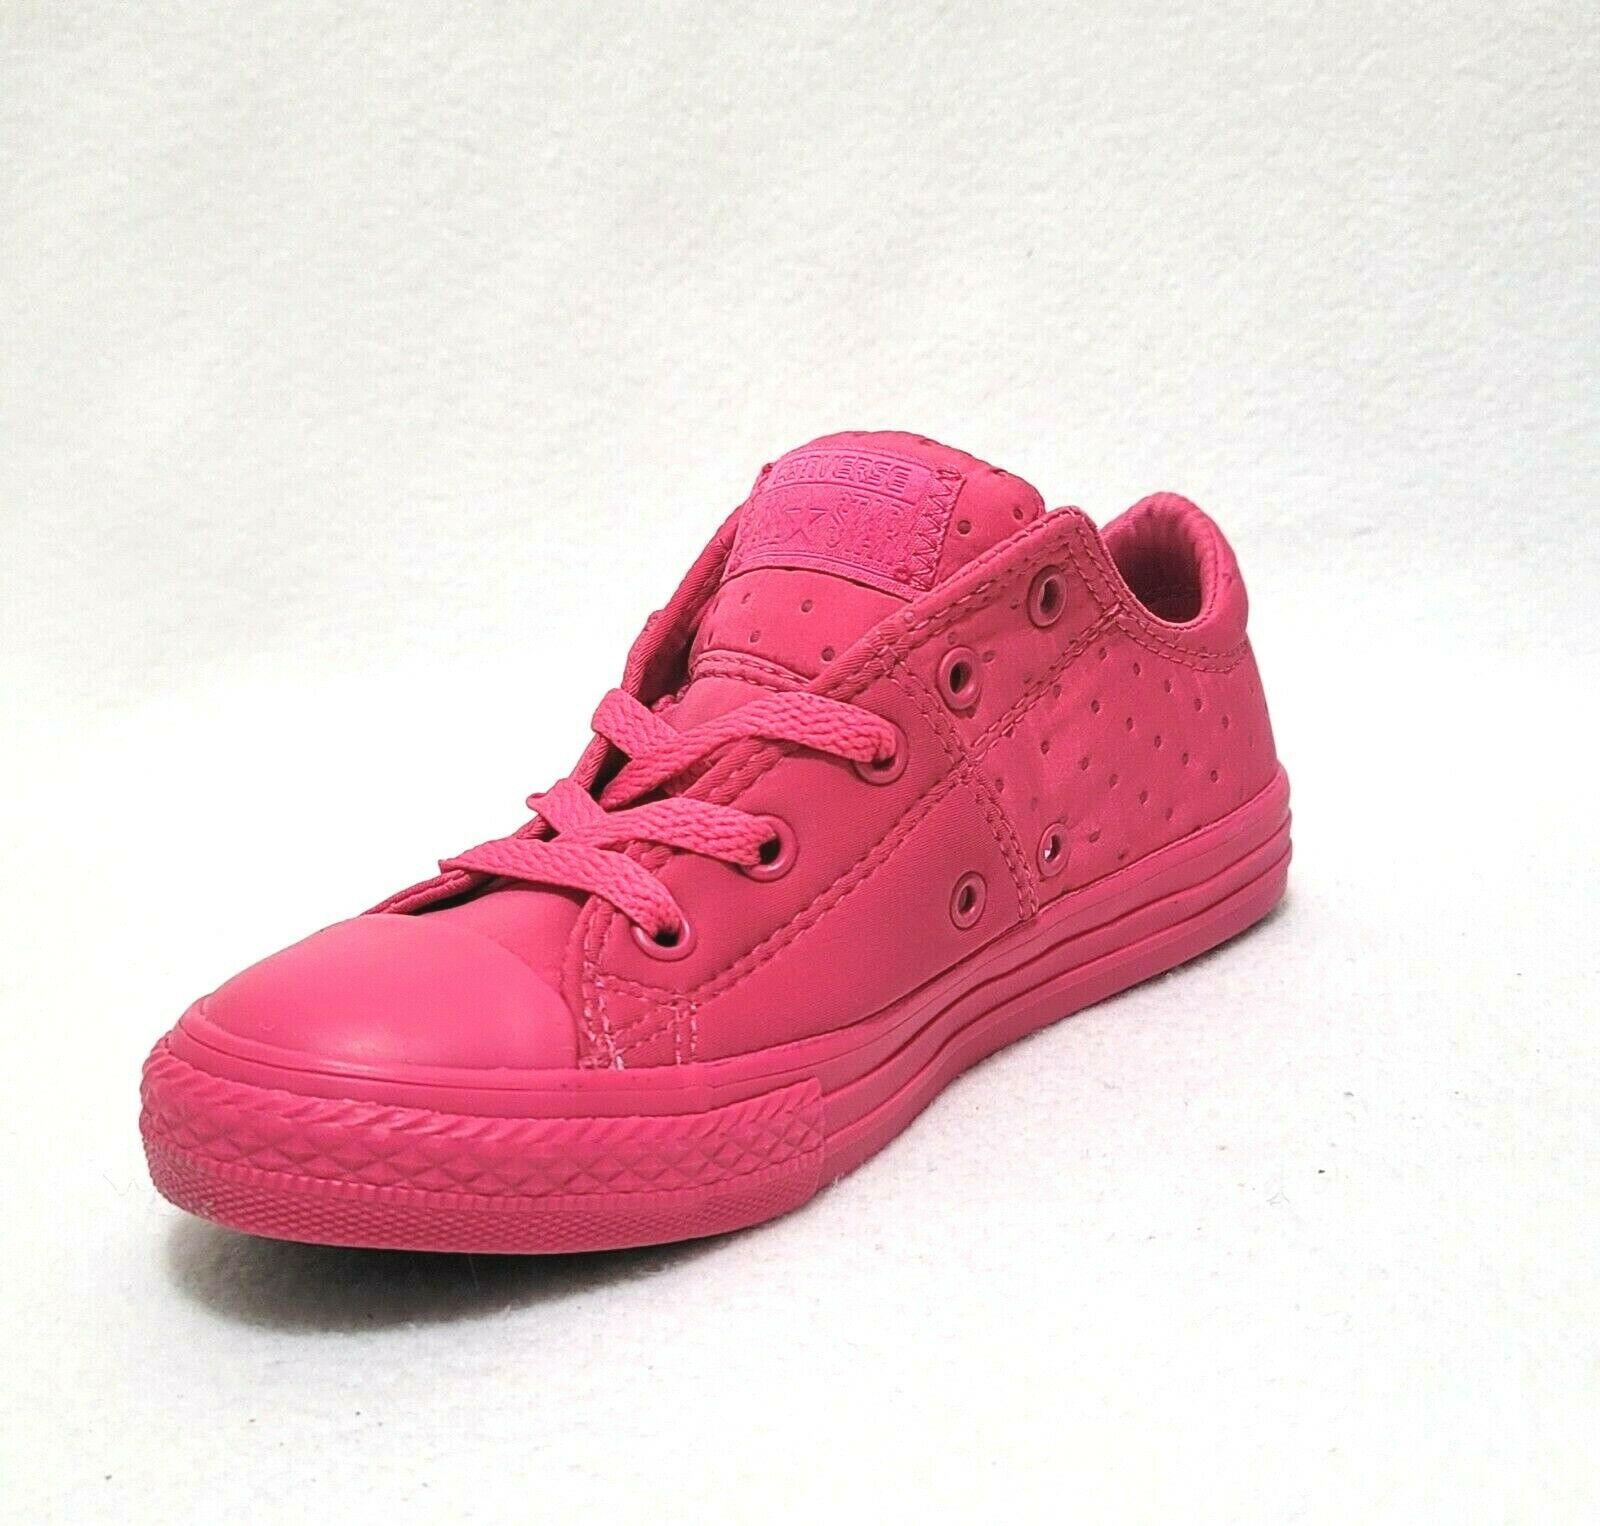 Converse Kid's Girls Chuck Taylor All Star Madison Ox Fashion Sneaker Shoe, Pink - SVNYFancy